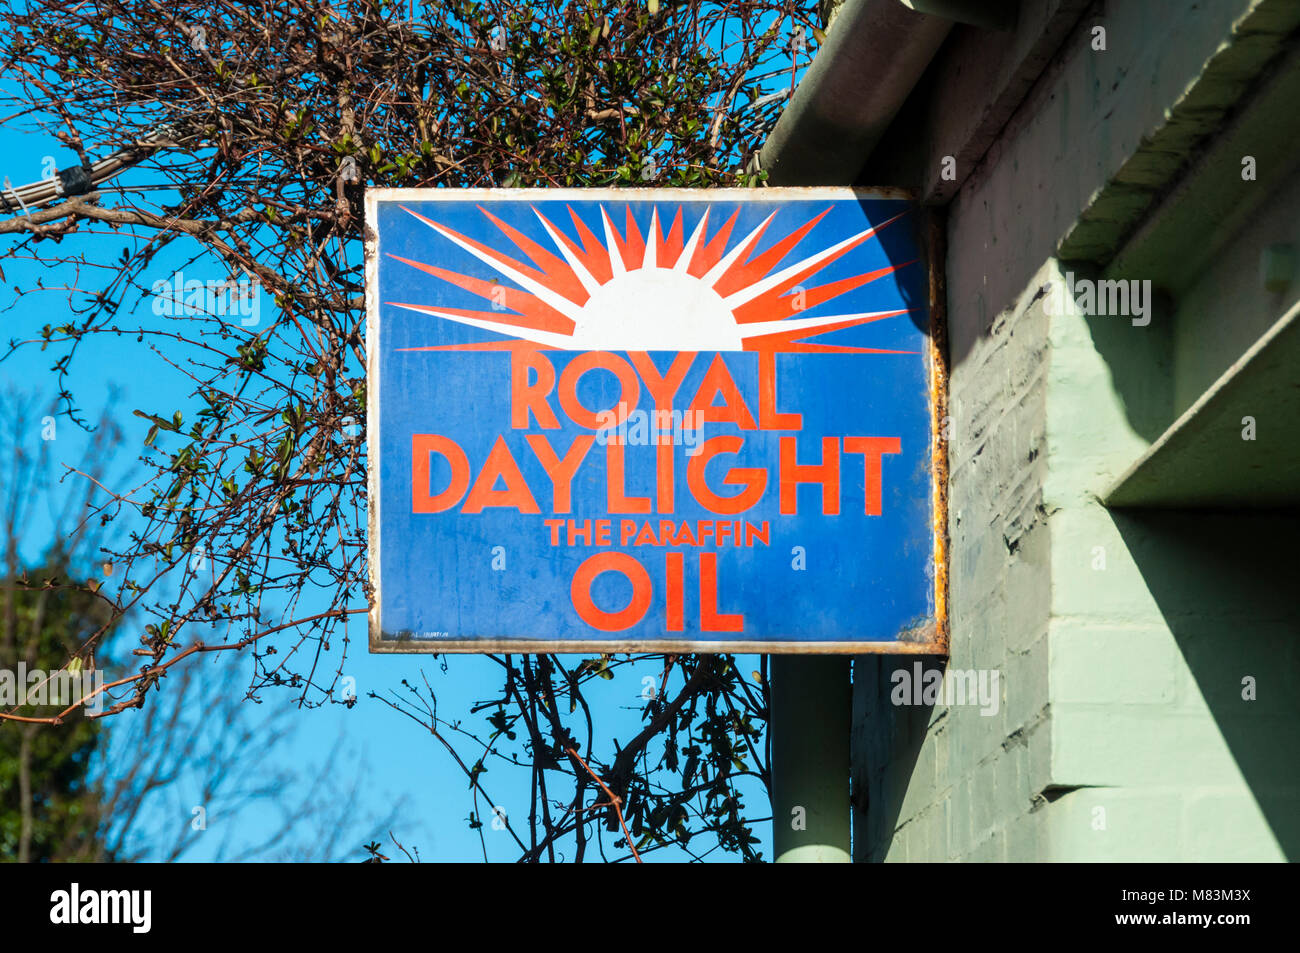 Royal Daylight Paraffin Oil sign Stock Photo